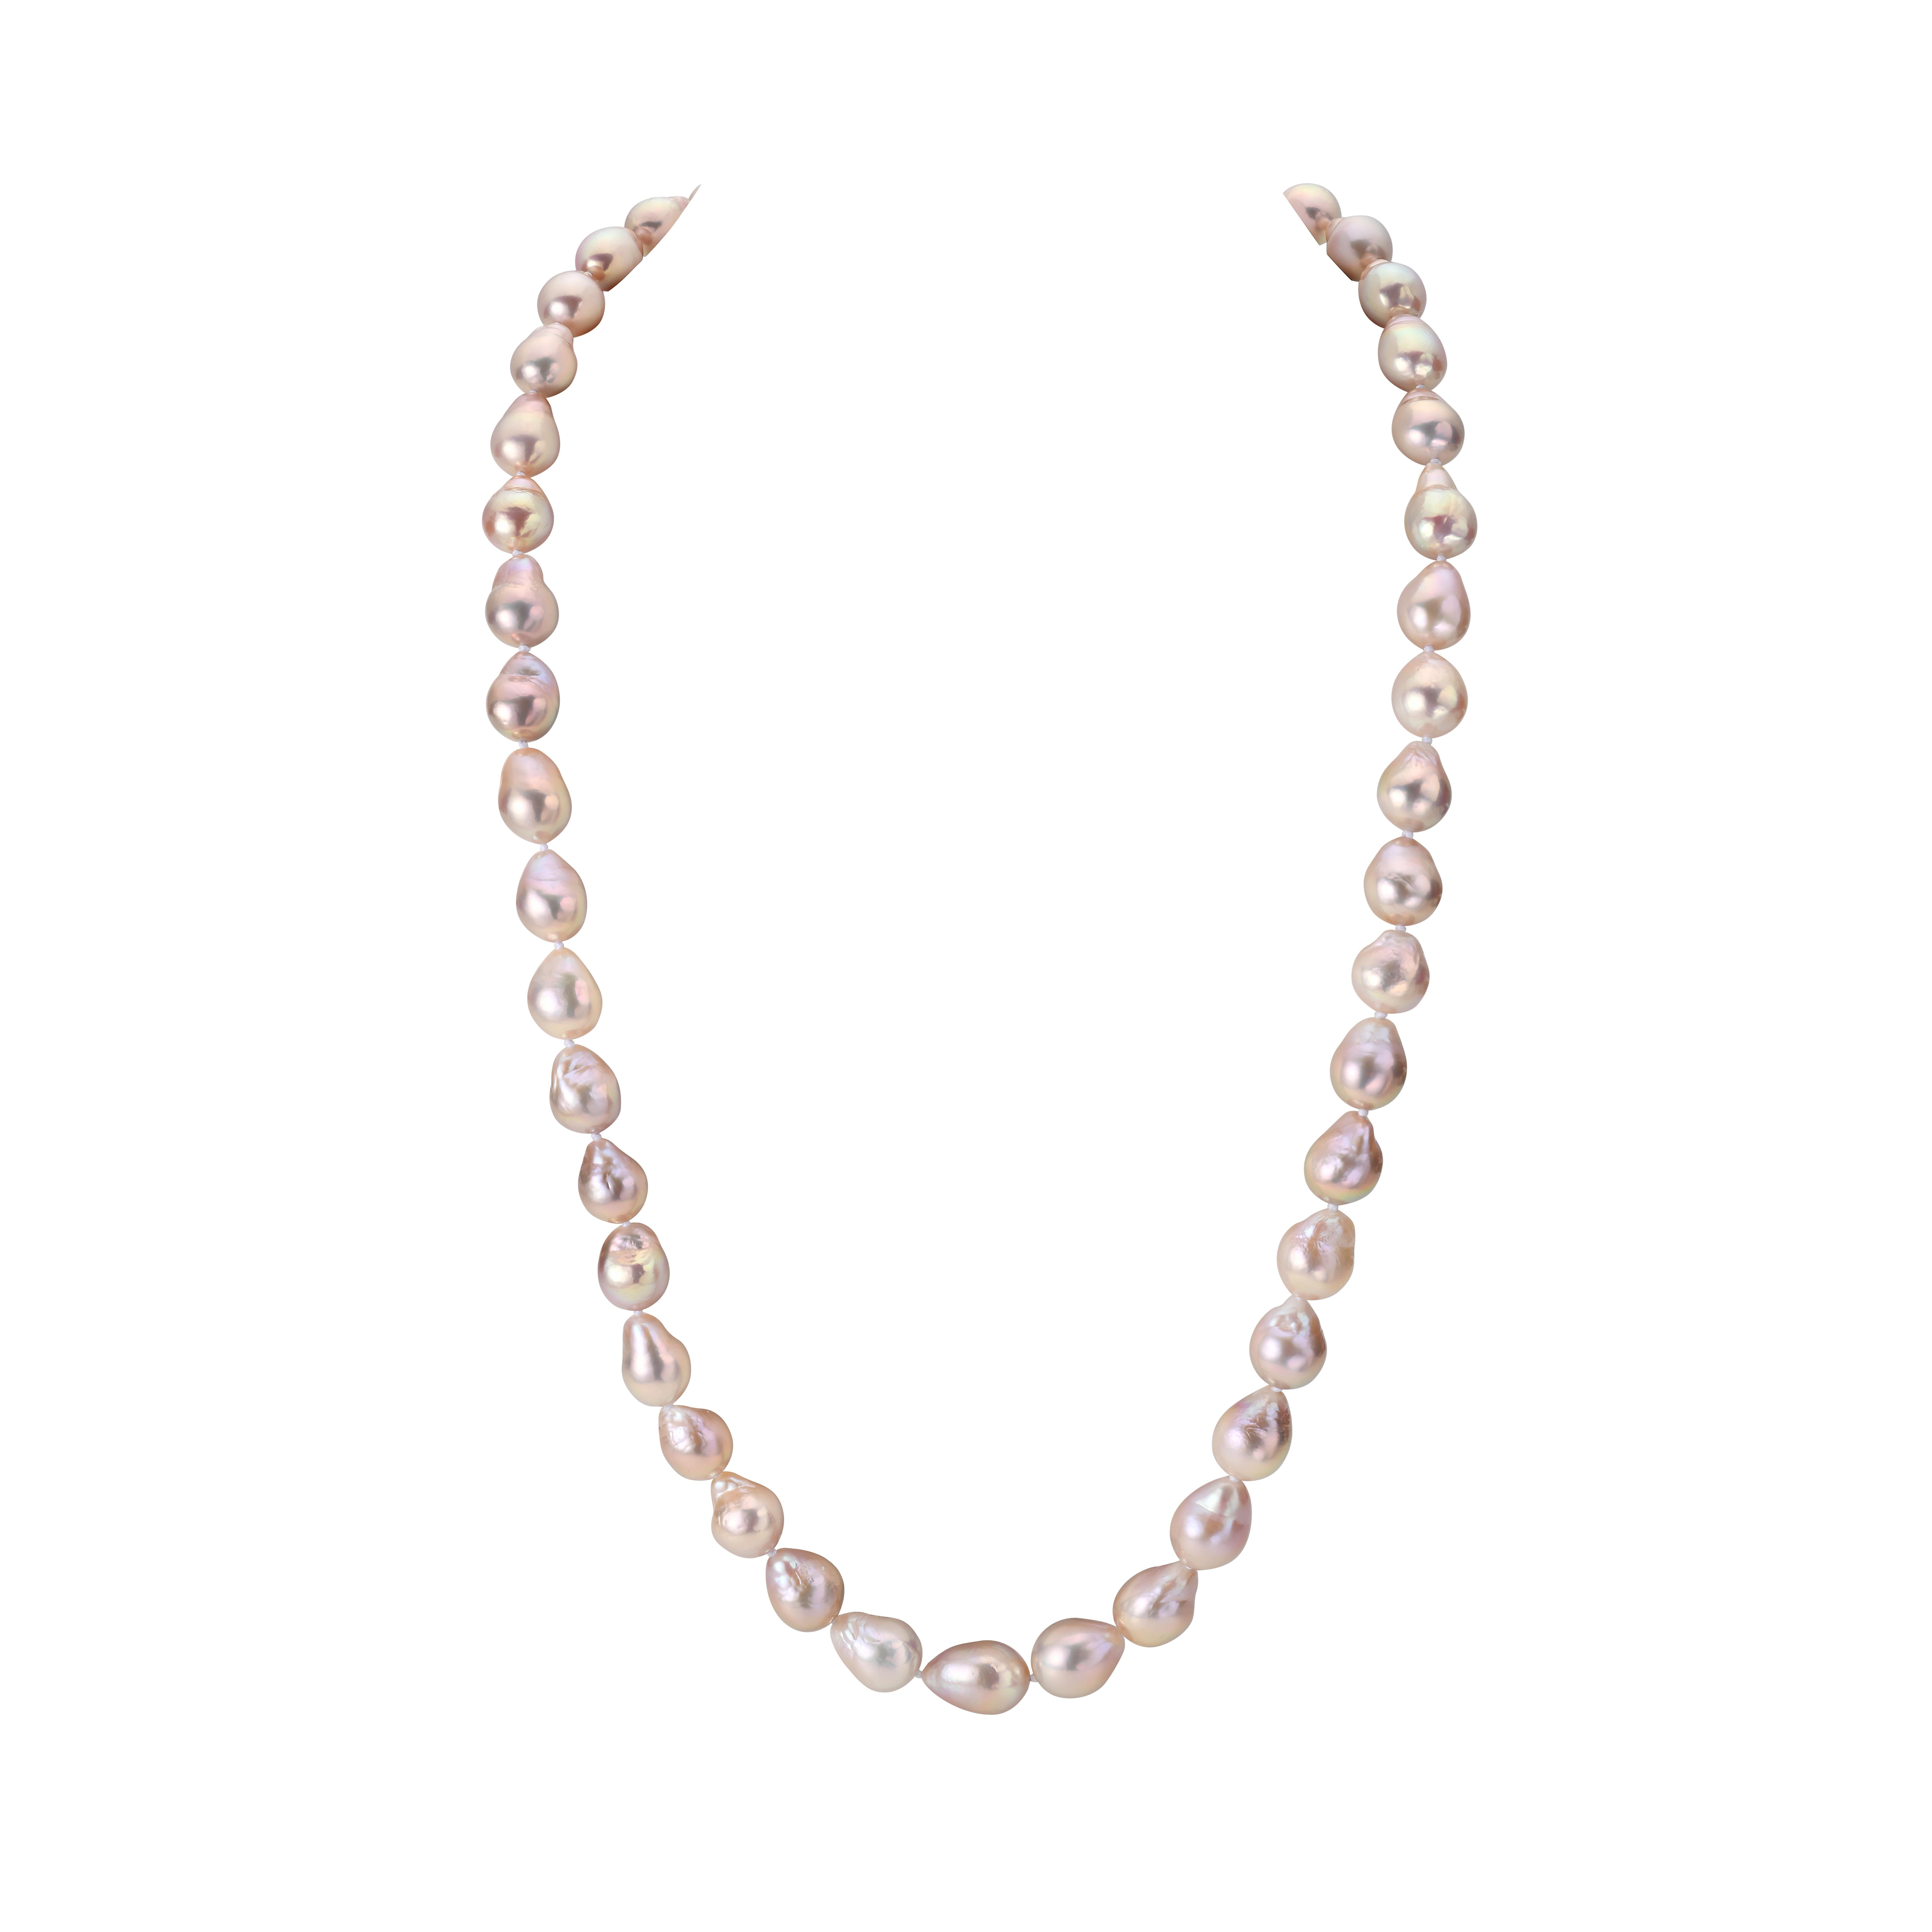 Freshwater Pink Baroque necklace measuring 36